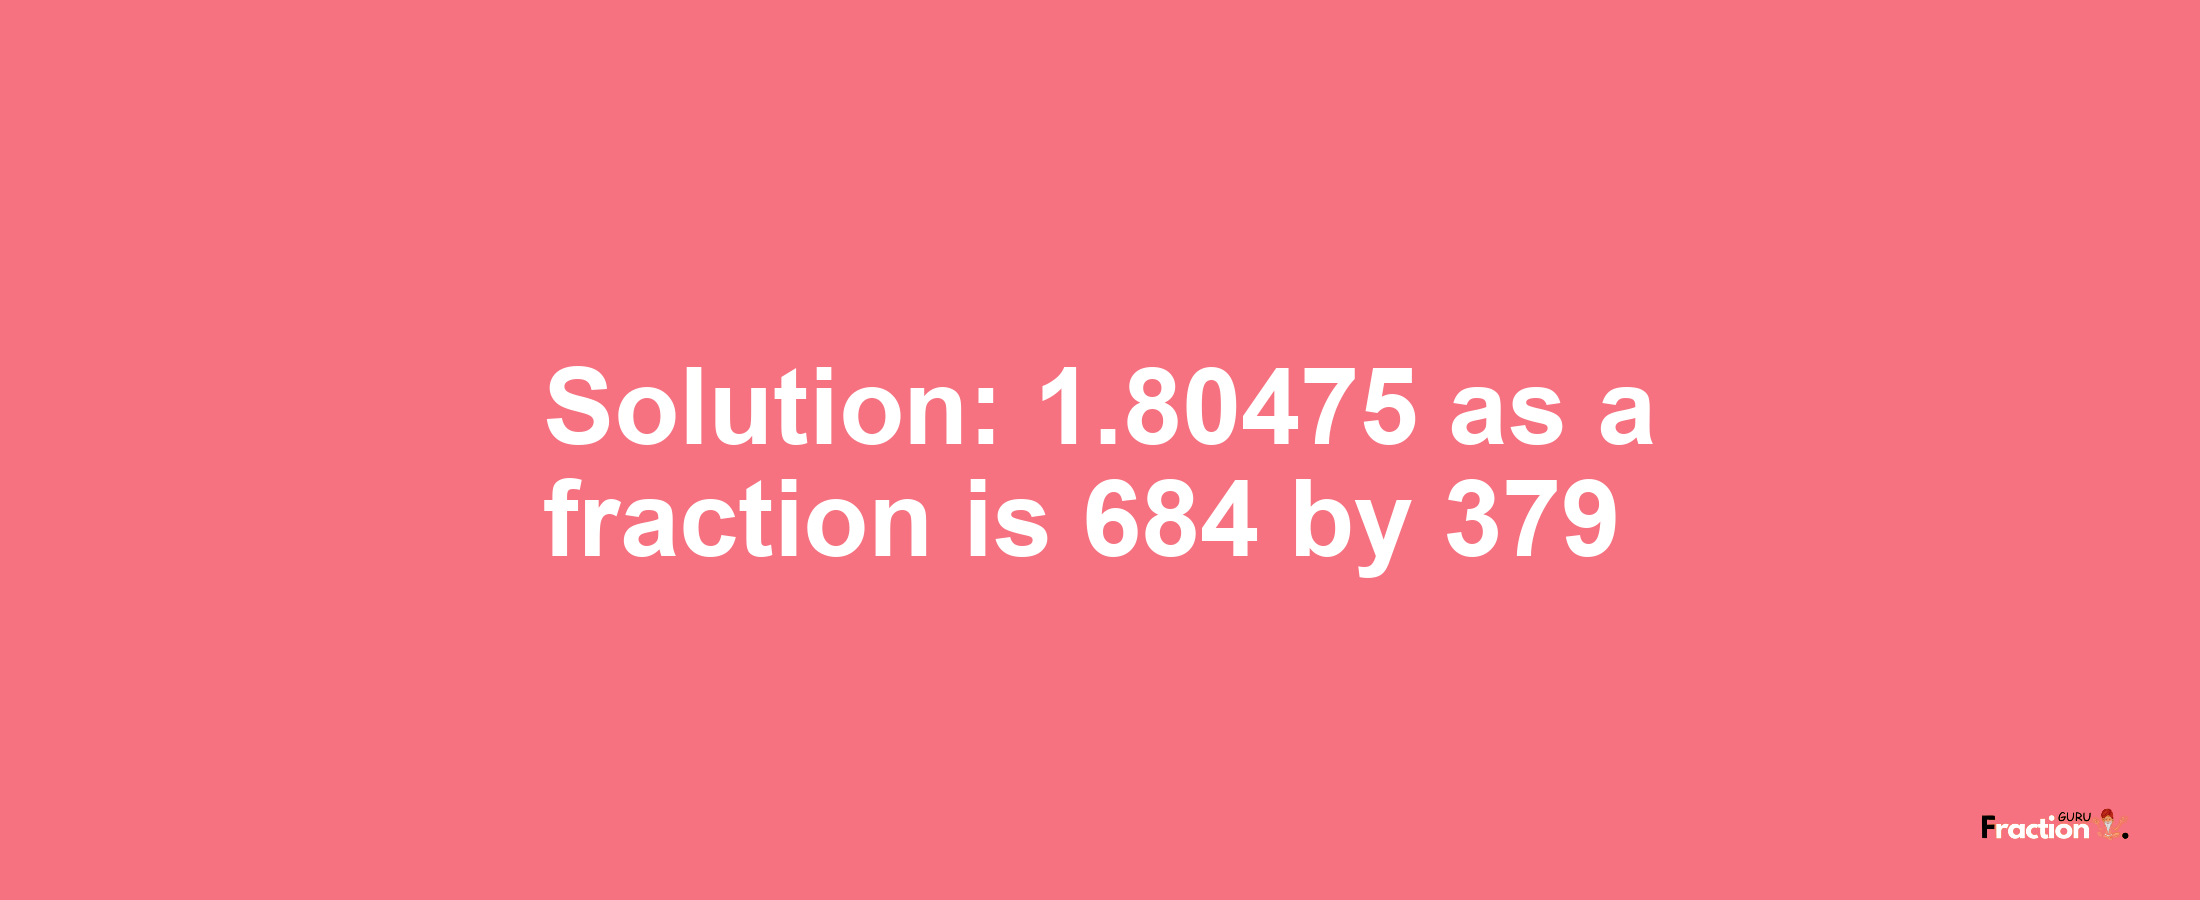 Solution:1.80475 as a fraction is 684/379